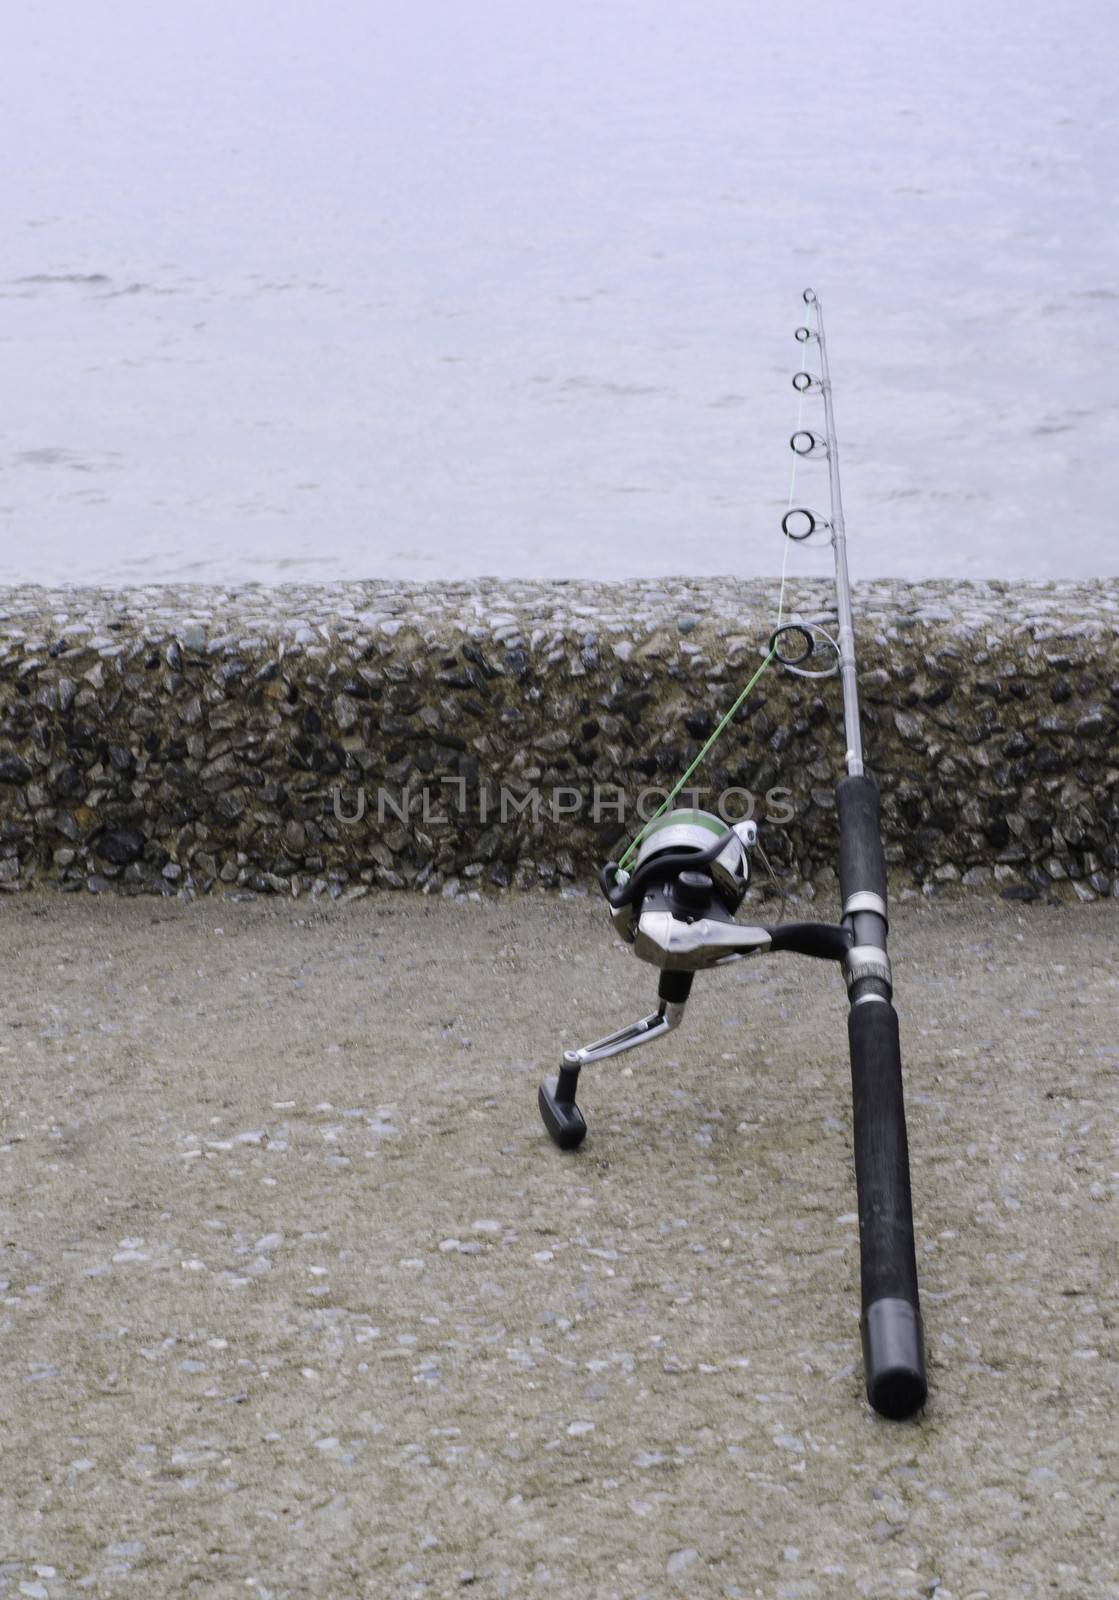 Handle rod and reel for saltwater fishing.